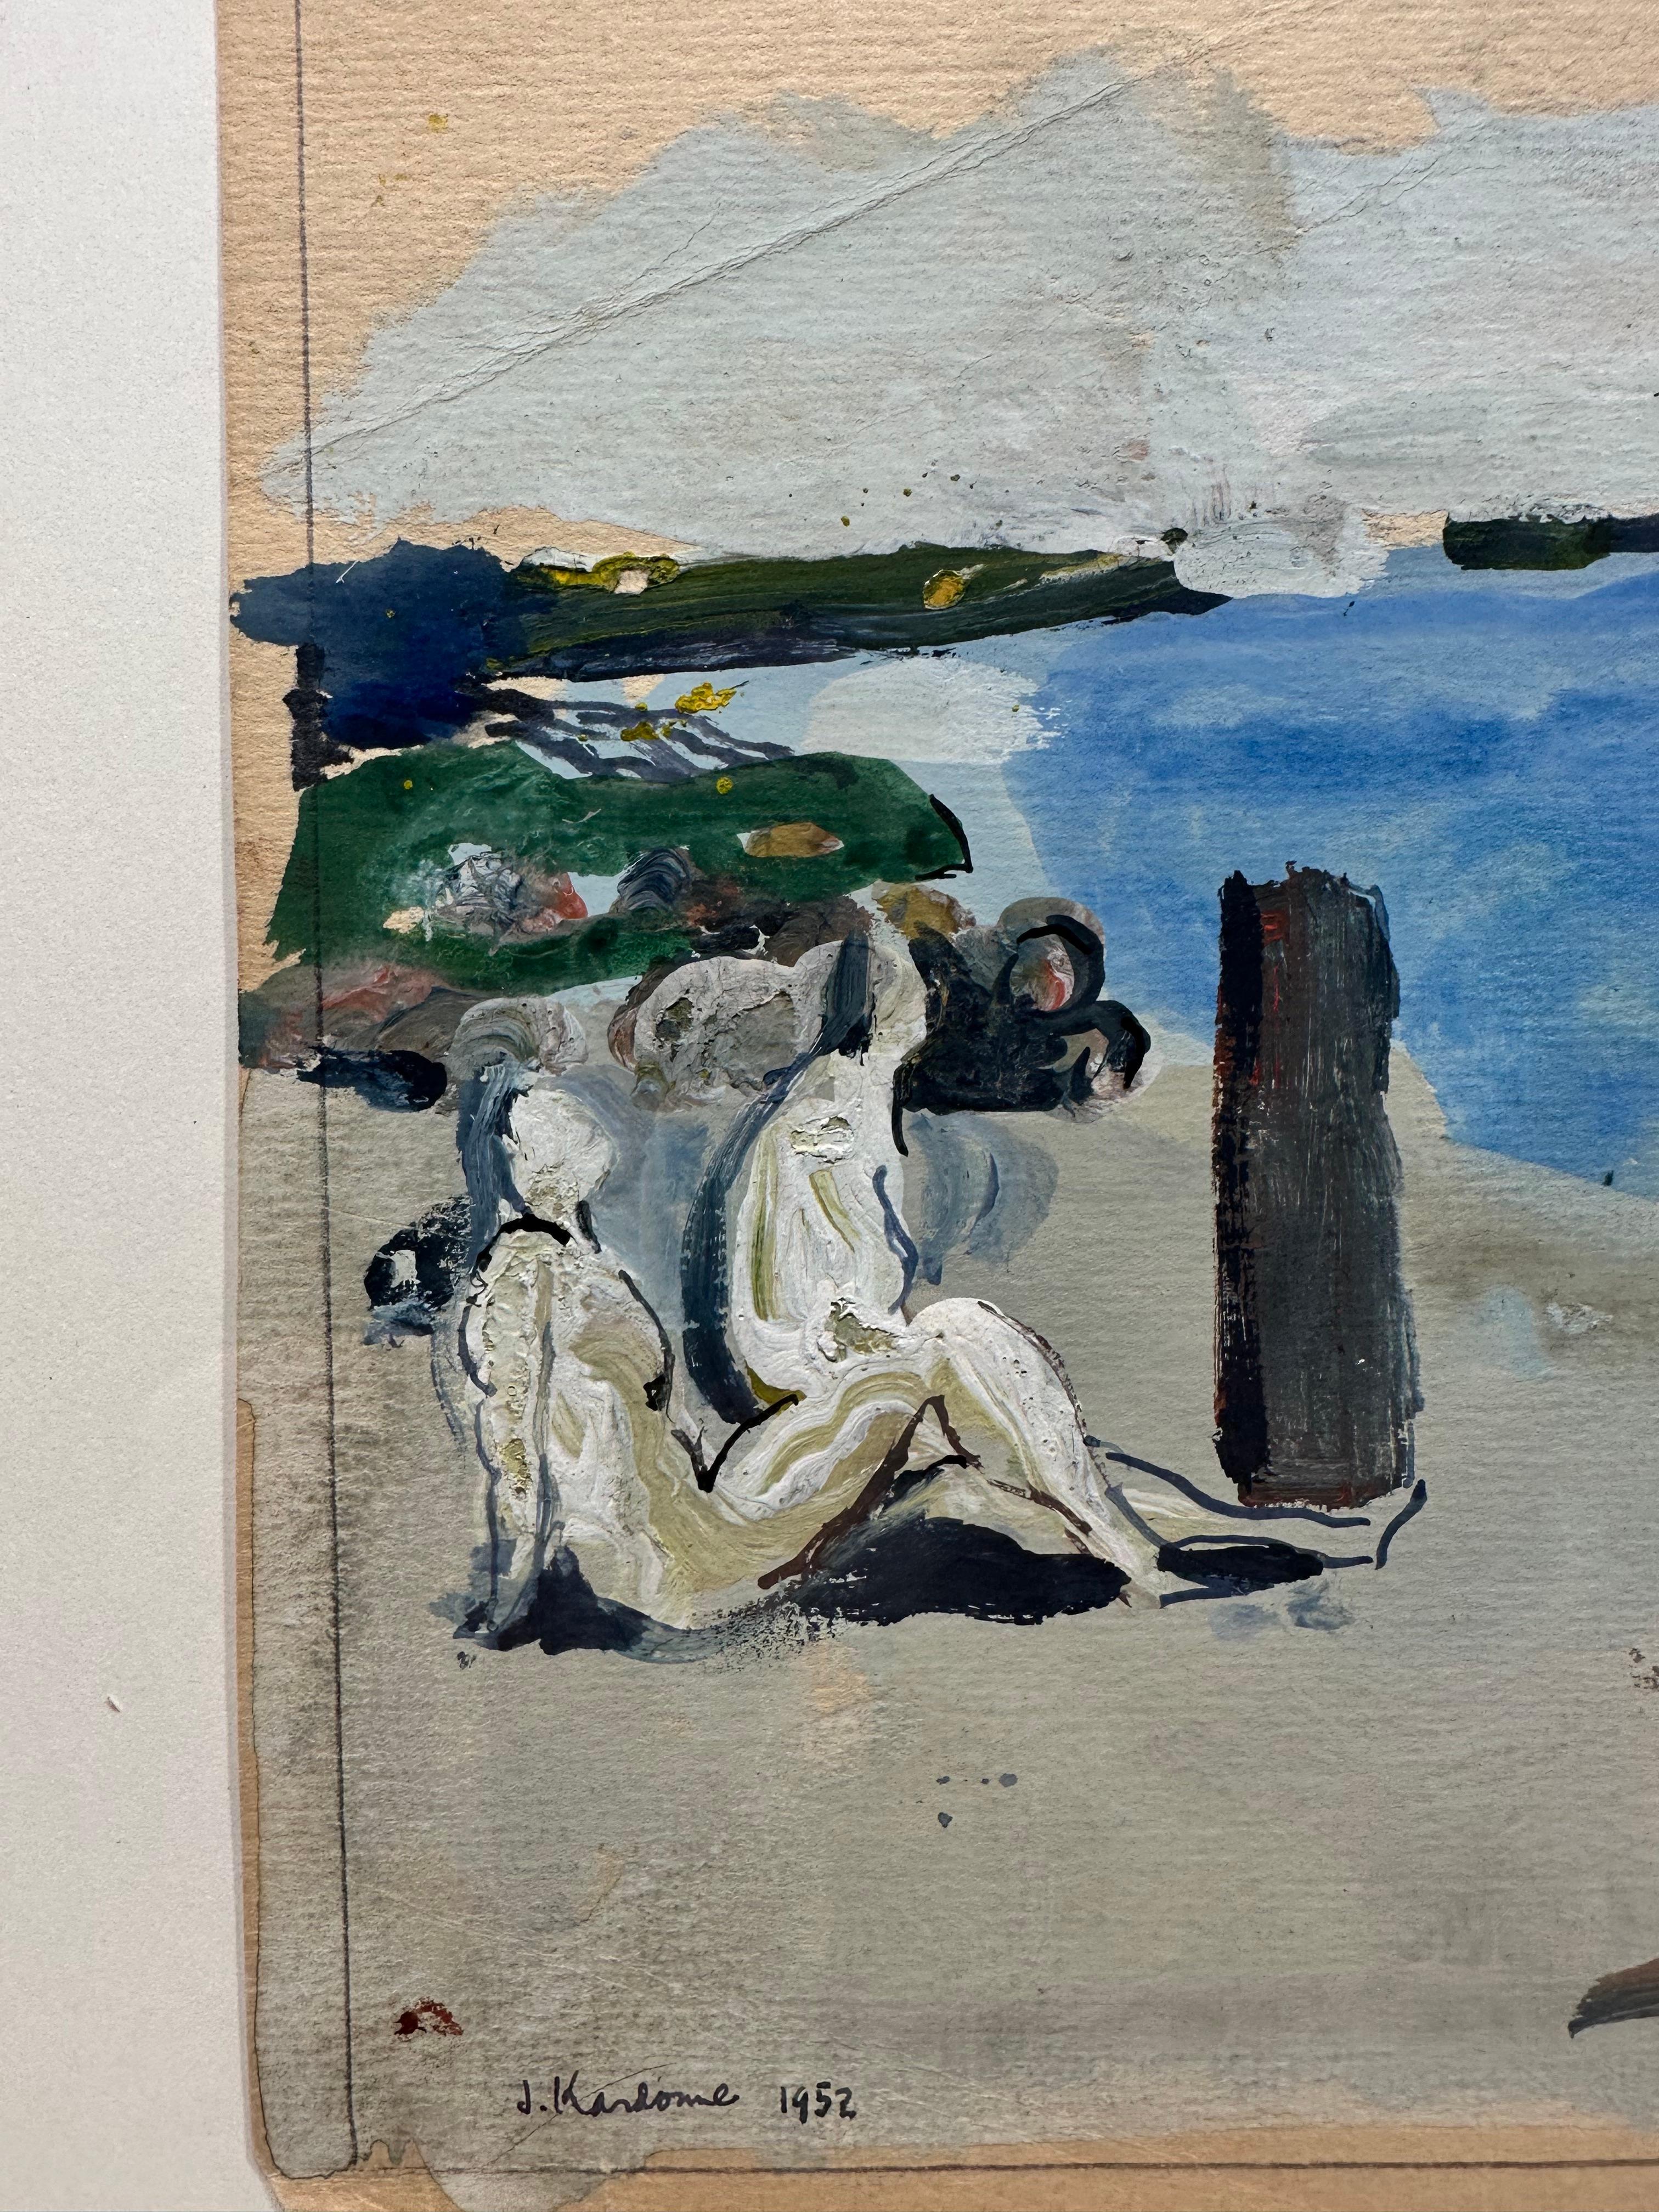 Joseph Kardonne (1911-1985).Male Figure at Beach, 1952.. Gouache on cardboard panel, 9 x 10 inches, 14.5 x 15.25 inches in maple frame. Signed, dated lower left.

Born in Newark, New Jersey in 1911, Joe Kardonne first showed an interest in art at an